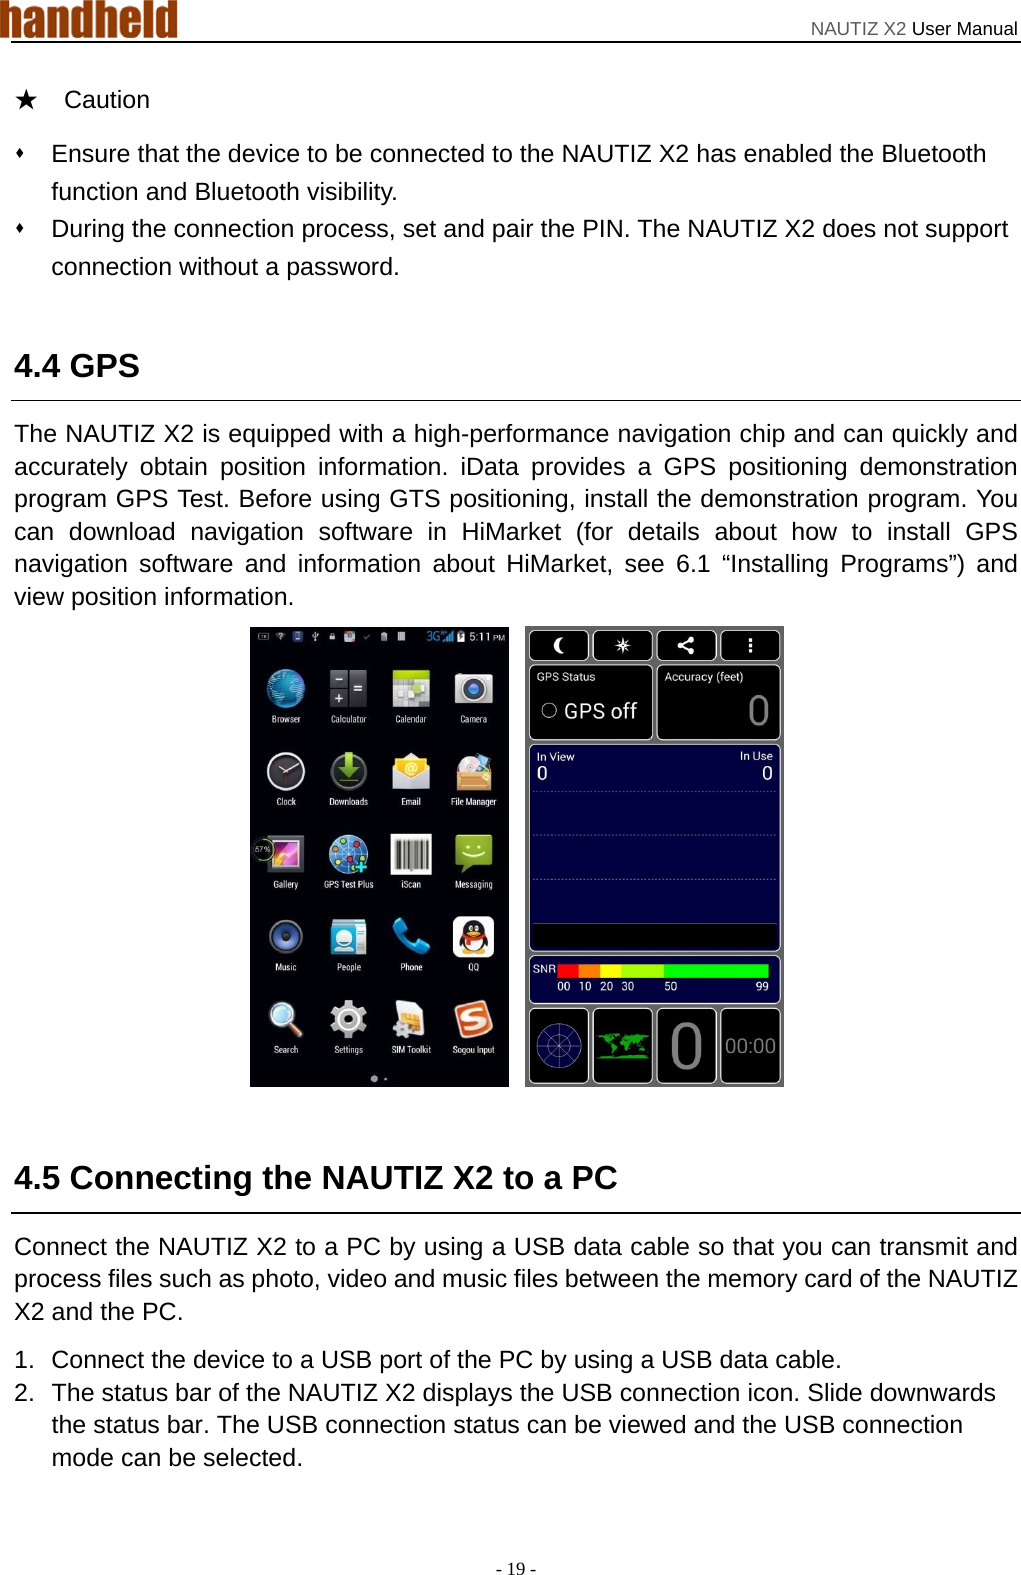 NAUTIZ X2 User Manual - 19 - ★  Caution   Ensure that the device to be connected to the NAUTIZ X2 has enabled the Bluetooth function and Bluetooth visibility.   During the connection process, set and pair the PIN. The NAUTIZ X2 does not support connection without a password.  4.4 GPS The NAUTIZ X2 is equipped with a high-performance navigation chip and can quickly and accurately obtain position information. iData provides a GPS positioning demonstration program GPS Test. Before using GTS positioning, install the demonstration program. You can download navigation software in HiMarket (for details about how to install GPS navigation software and information about HiMarket, see 6.1 “Installing Programs”) and view position information.    4.5 Connecting the NAUTIZ X2 to a PC Connect the NAUTIZ X2 to a PC by using a USB data cable so that you can transmit and process files such as photo, video and music files between the memory card of the NAUTIZ X2 and the PC. 1.  Connect the device to a USB port of the PC by using a USB data cable. 2.  The status bar of the NAUTIZ X2 displays the USB connection icon. Slide downwards the status bar. The USB connection status can be viewed and the USB connection mode can be selected. 